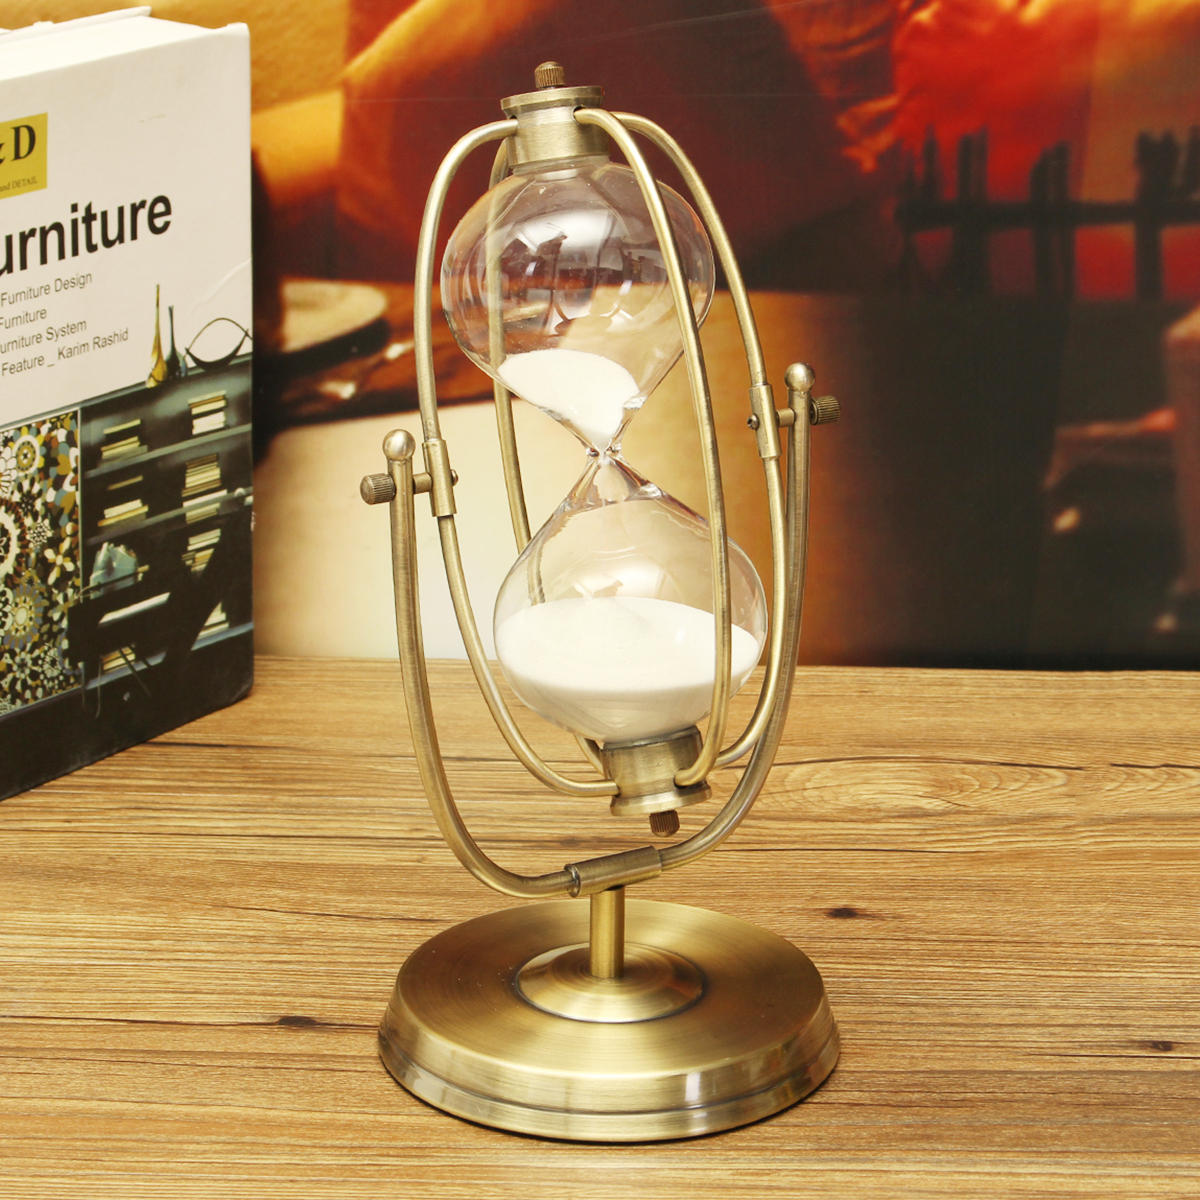 30 Minute Rolating Sand Hourglass Sandglass Sand Timer Clock Home Room Decorations Gift